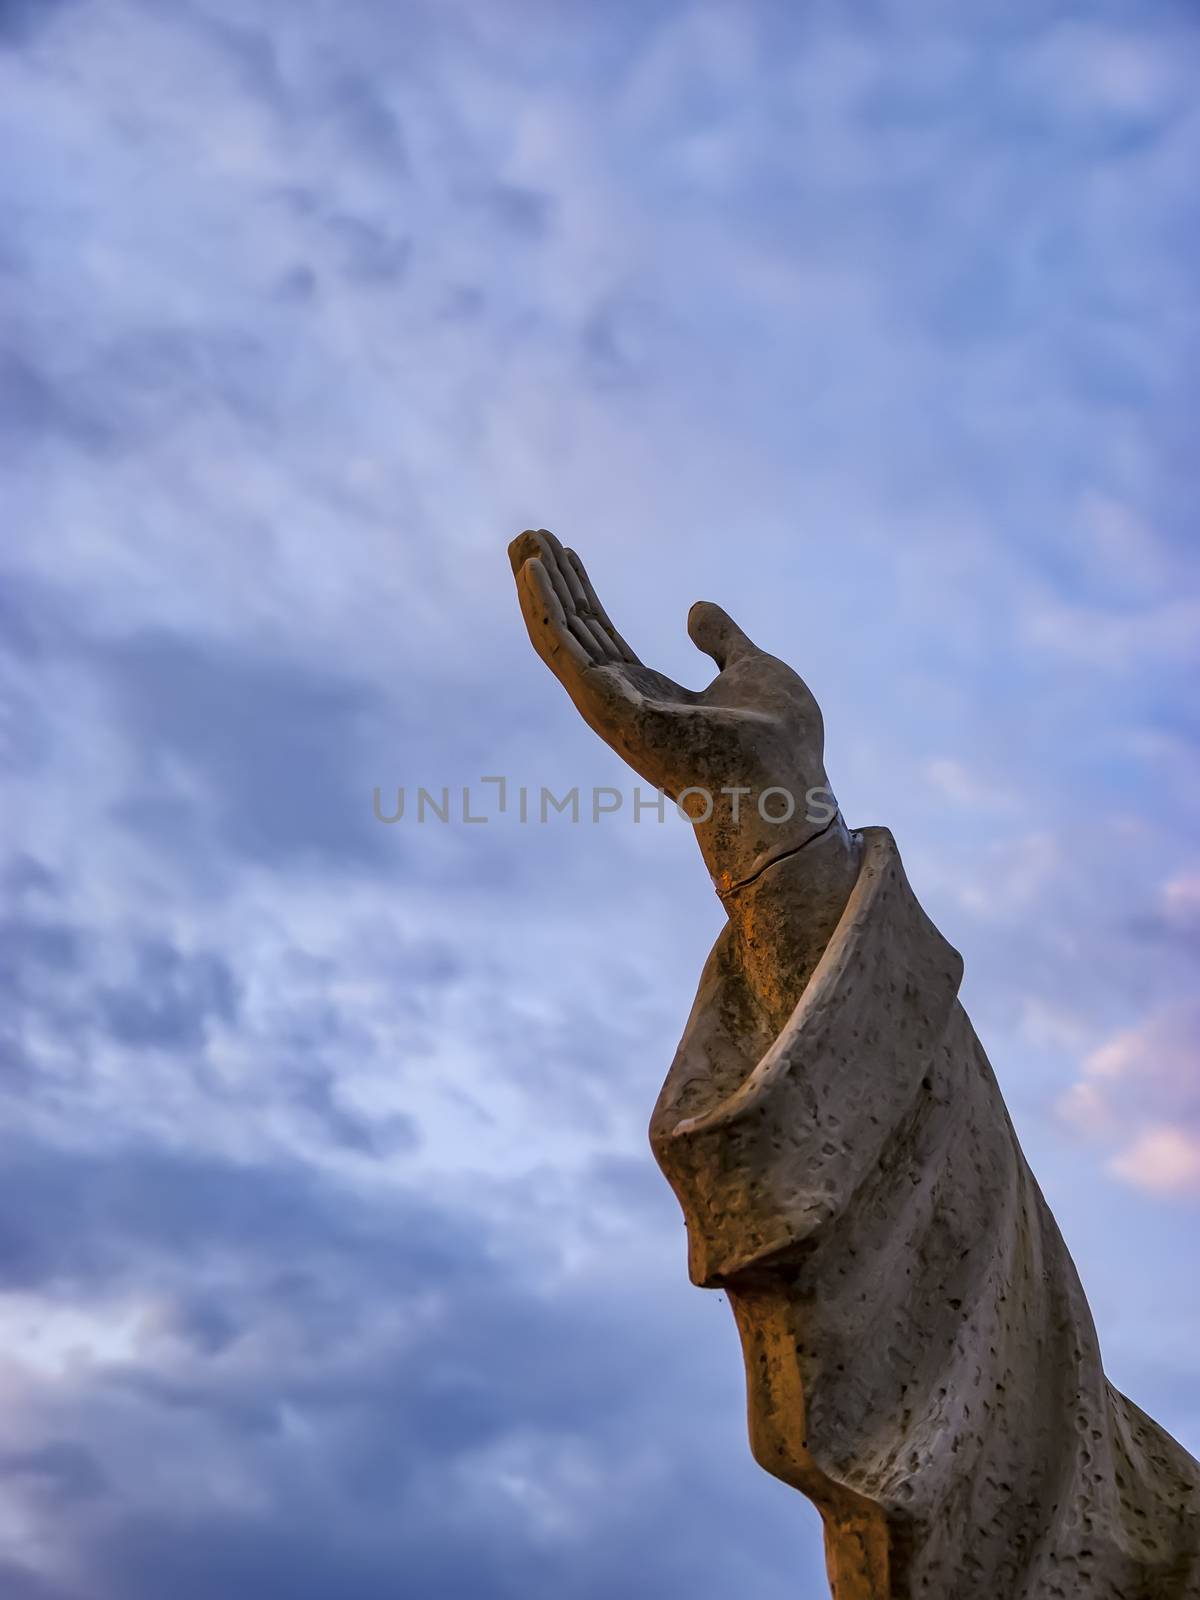 Hand of Jesus statue on the road on the island Corfu, Greece. In the background the sky with clouds.